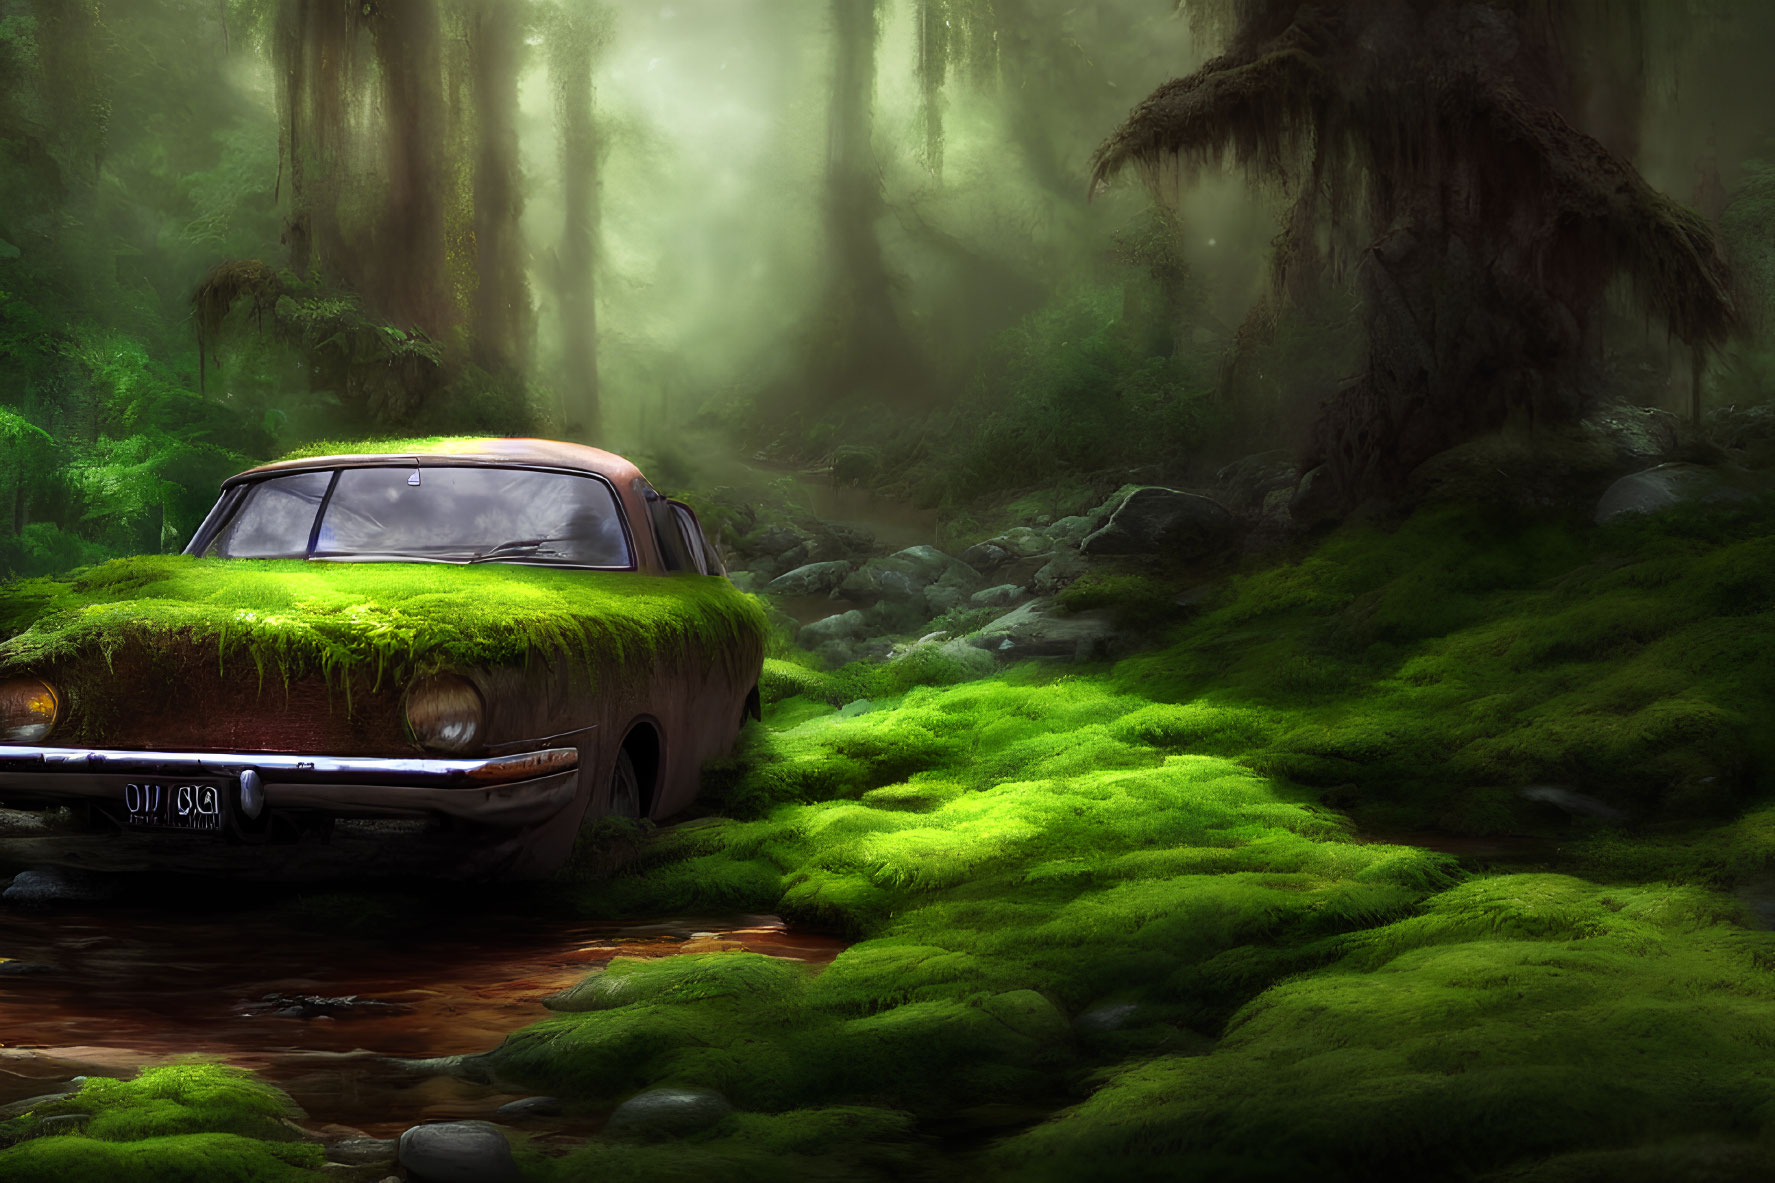 Abandoned moss-covered car in misty green forest